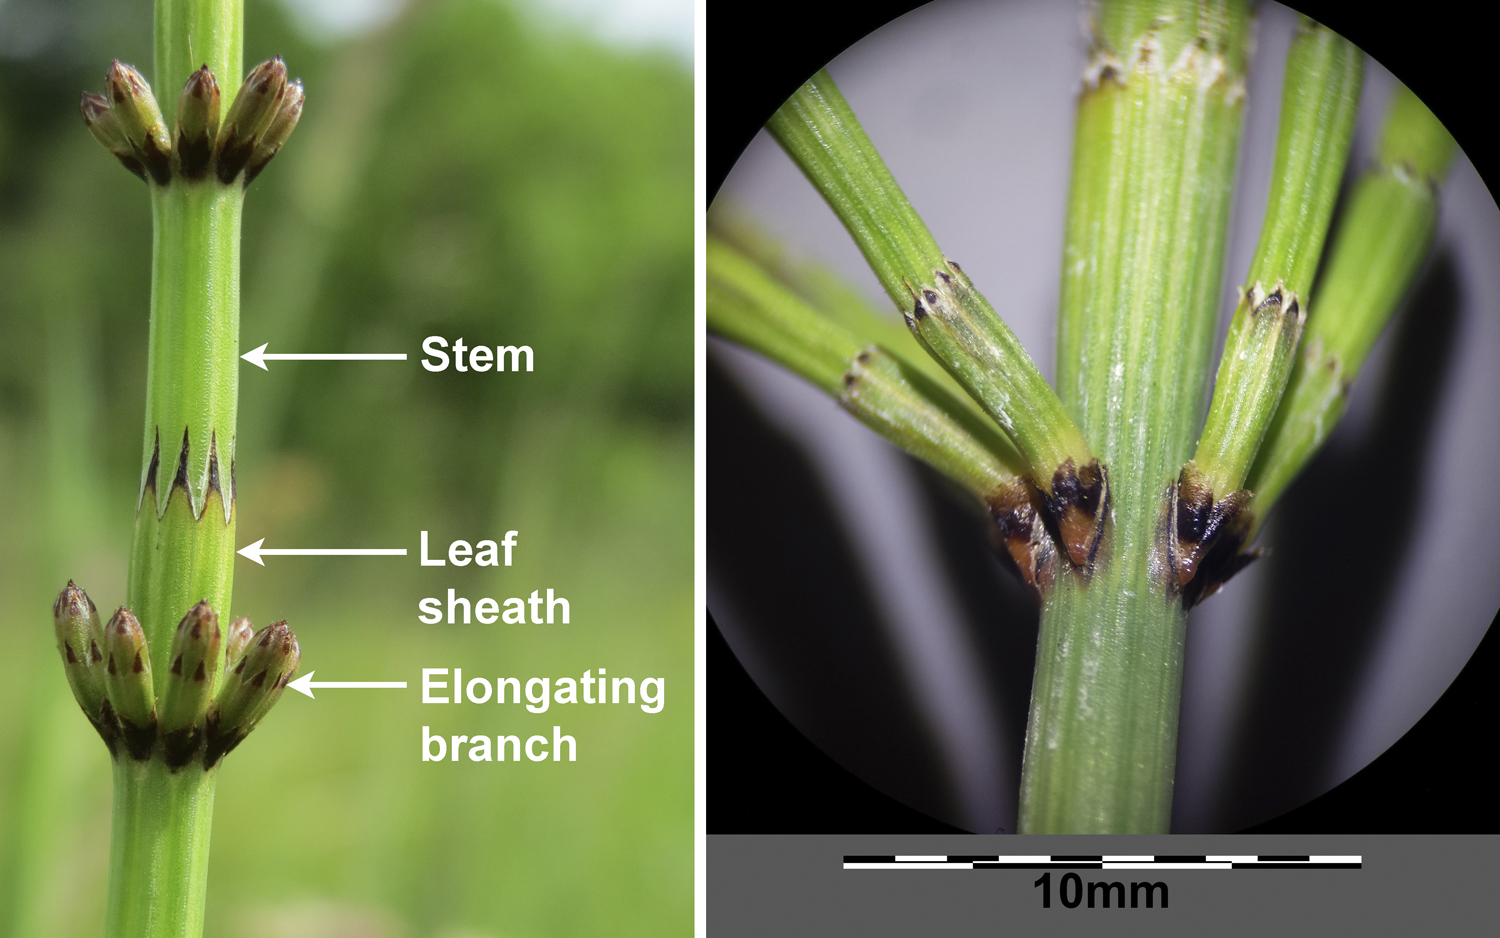 2-Panel photo figure. Panel 1: Marsh horsetail showing two whorls of developing branches, a leaf sheath, and a portion of the stem. Panel 2: Branched horsetail, detail of the bases of the branches in a whorl of branches.